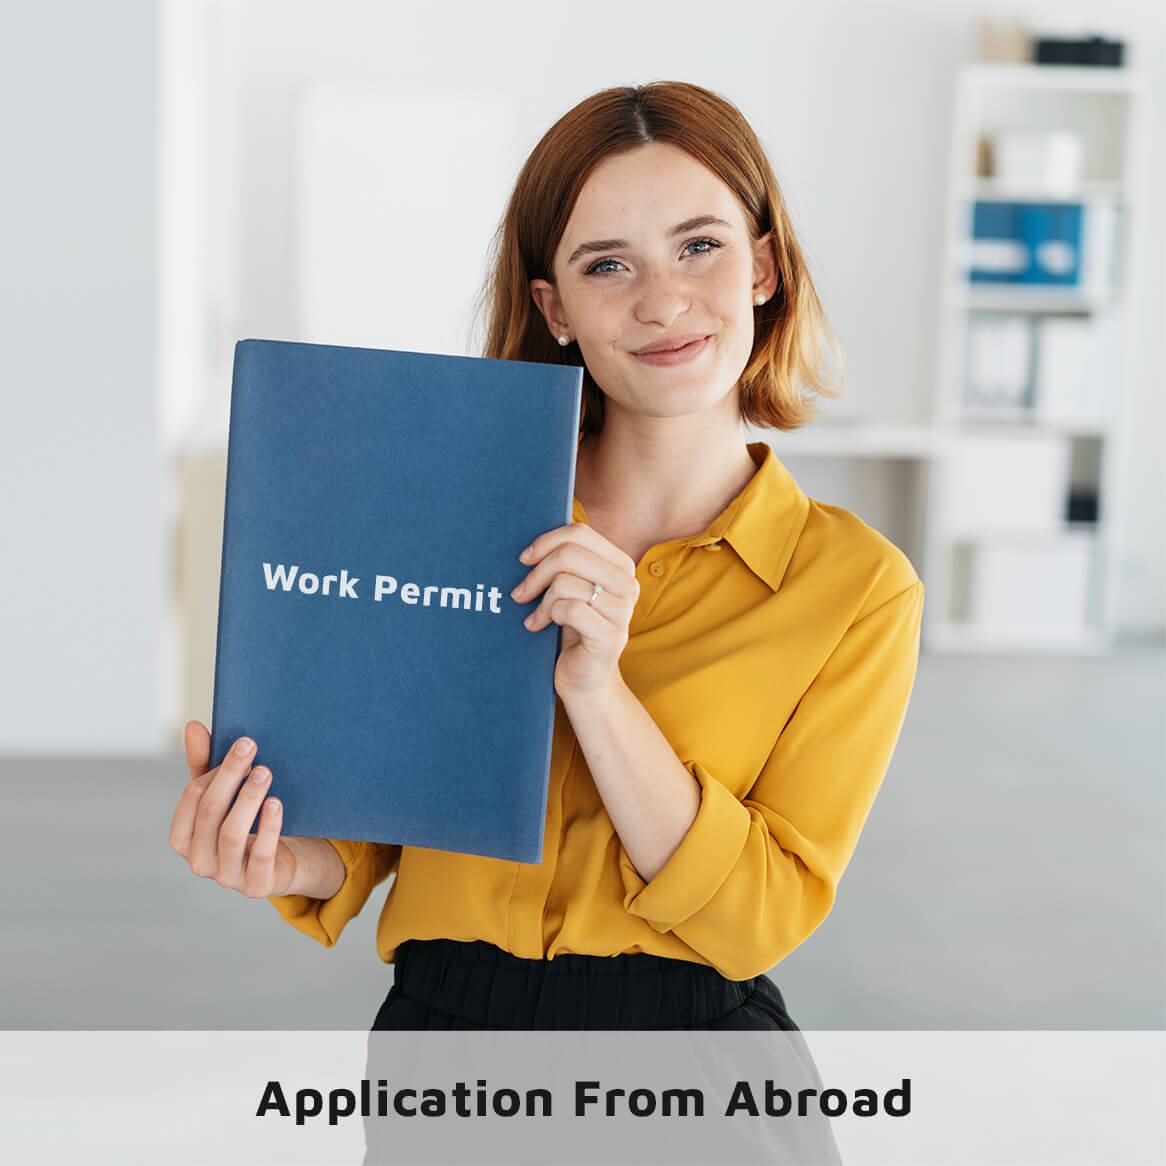 Work Permit Application from Abroad